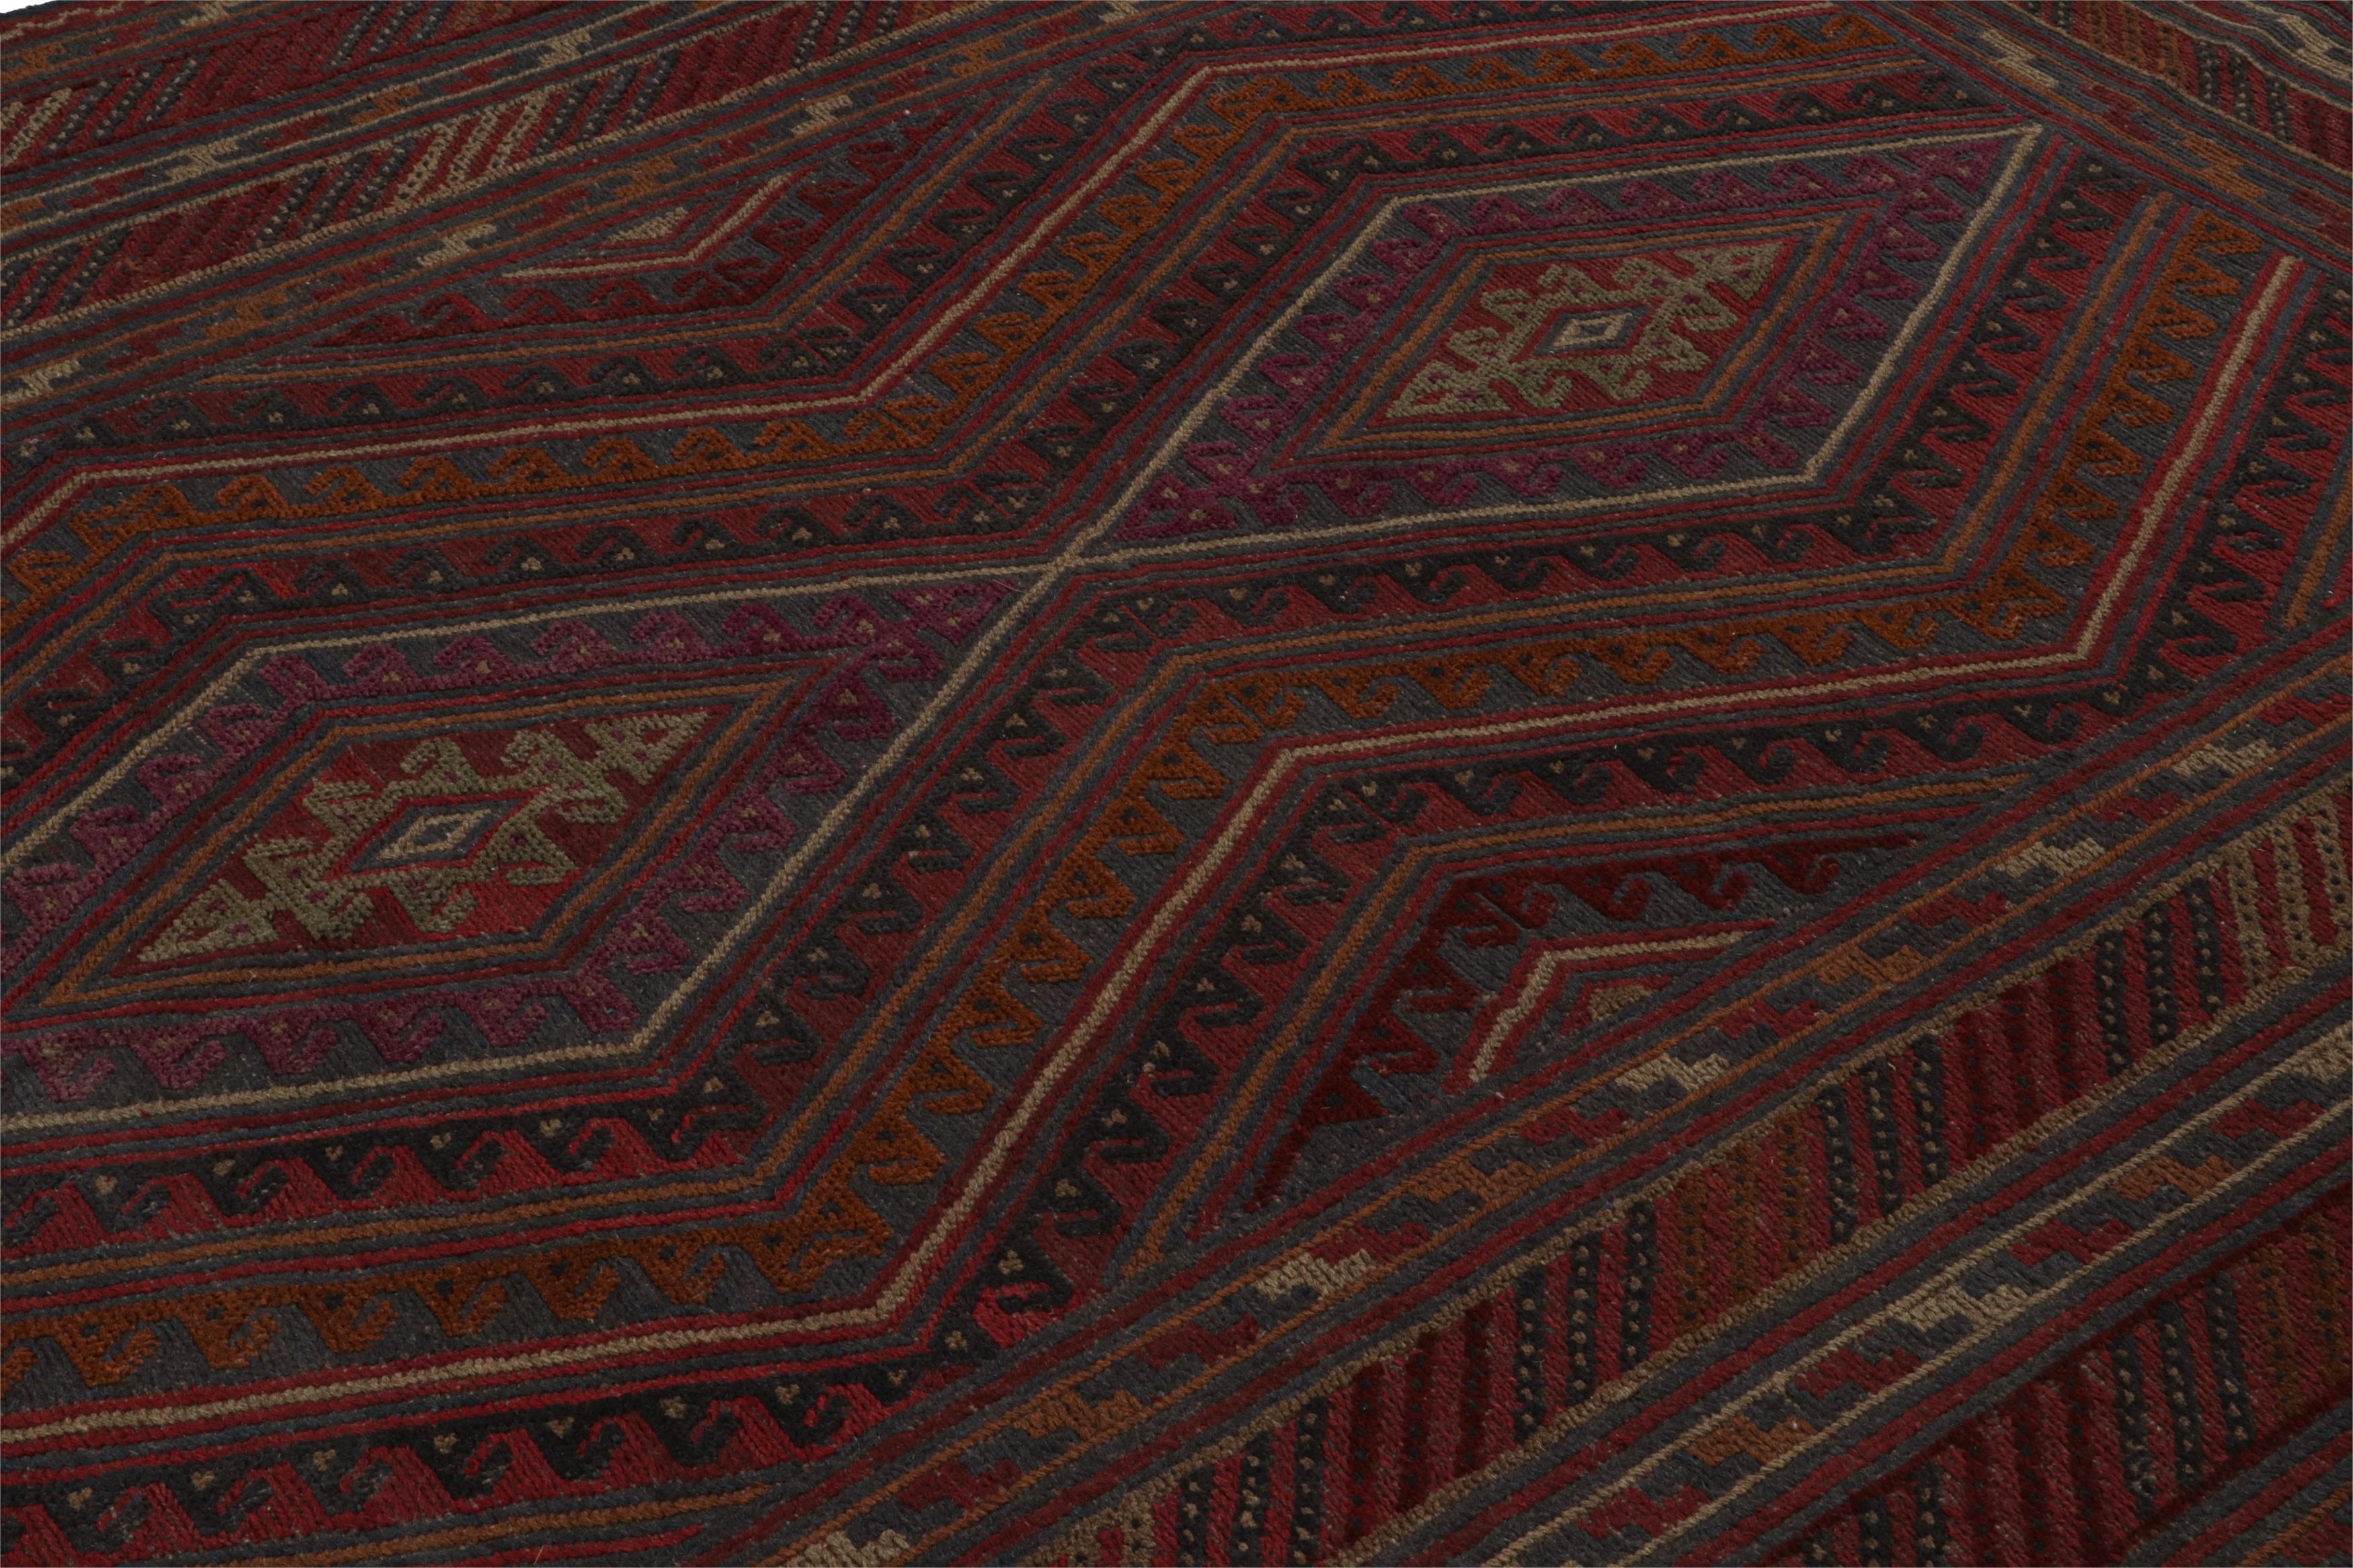 Hand-Knotted Rug & Kilim’s Mashwani Afghan Baluch Rug in Red, Rust & Blue Geometric Patterns  For Sale